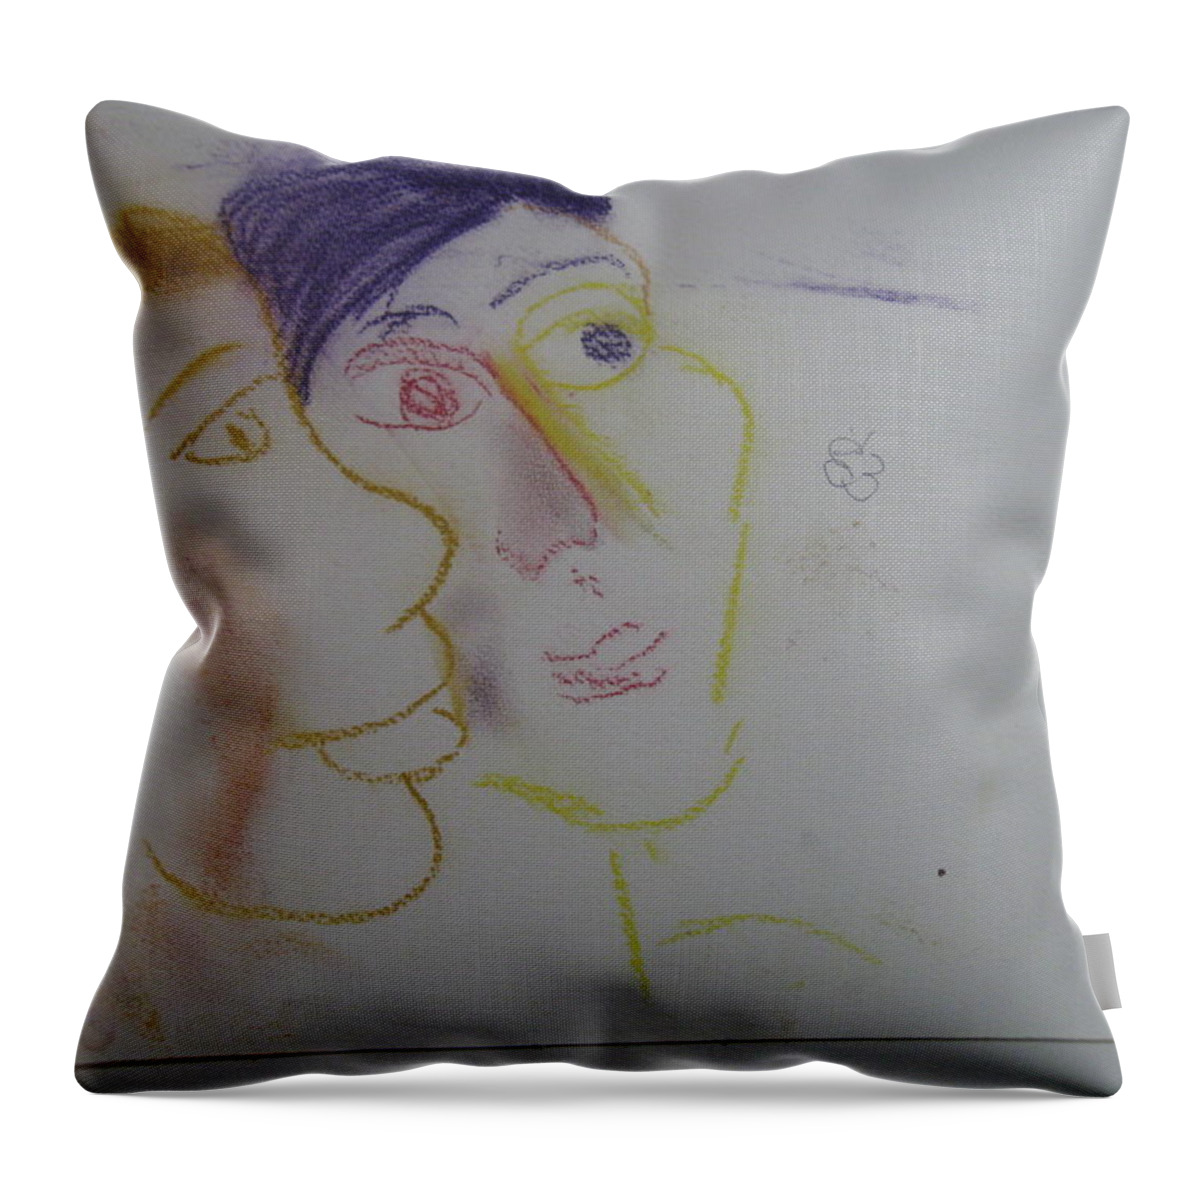  Throw Pillow featuring the drawing Two Faces by AJ Brown